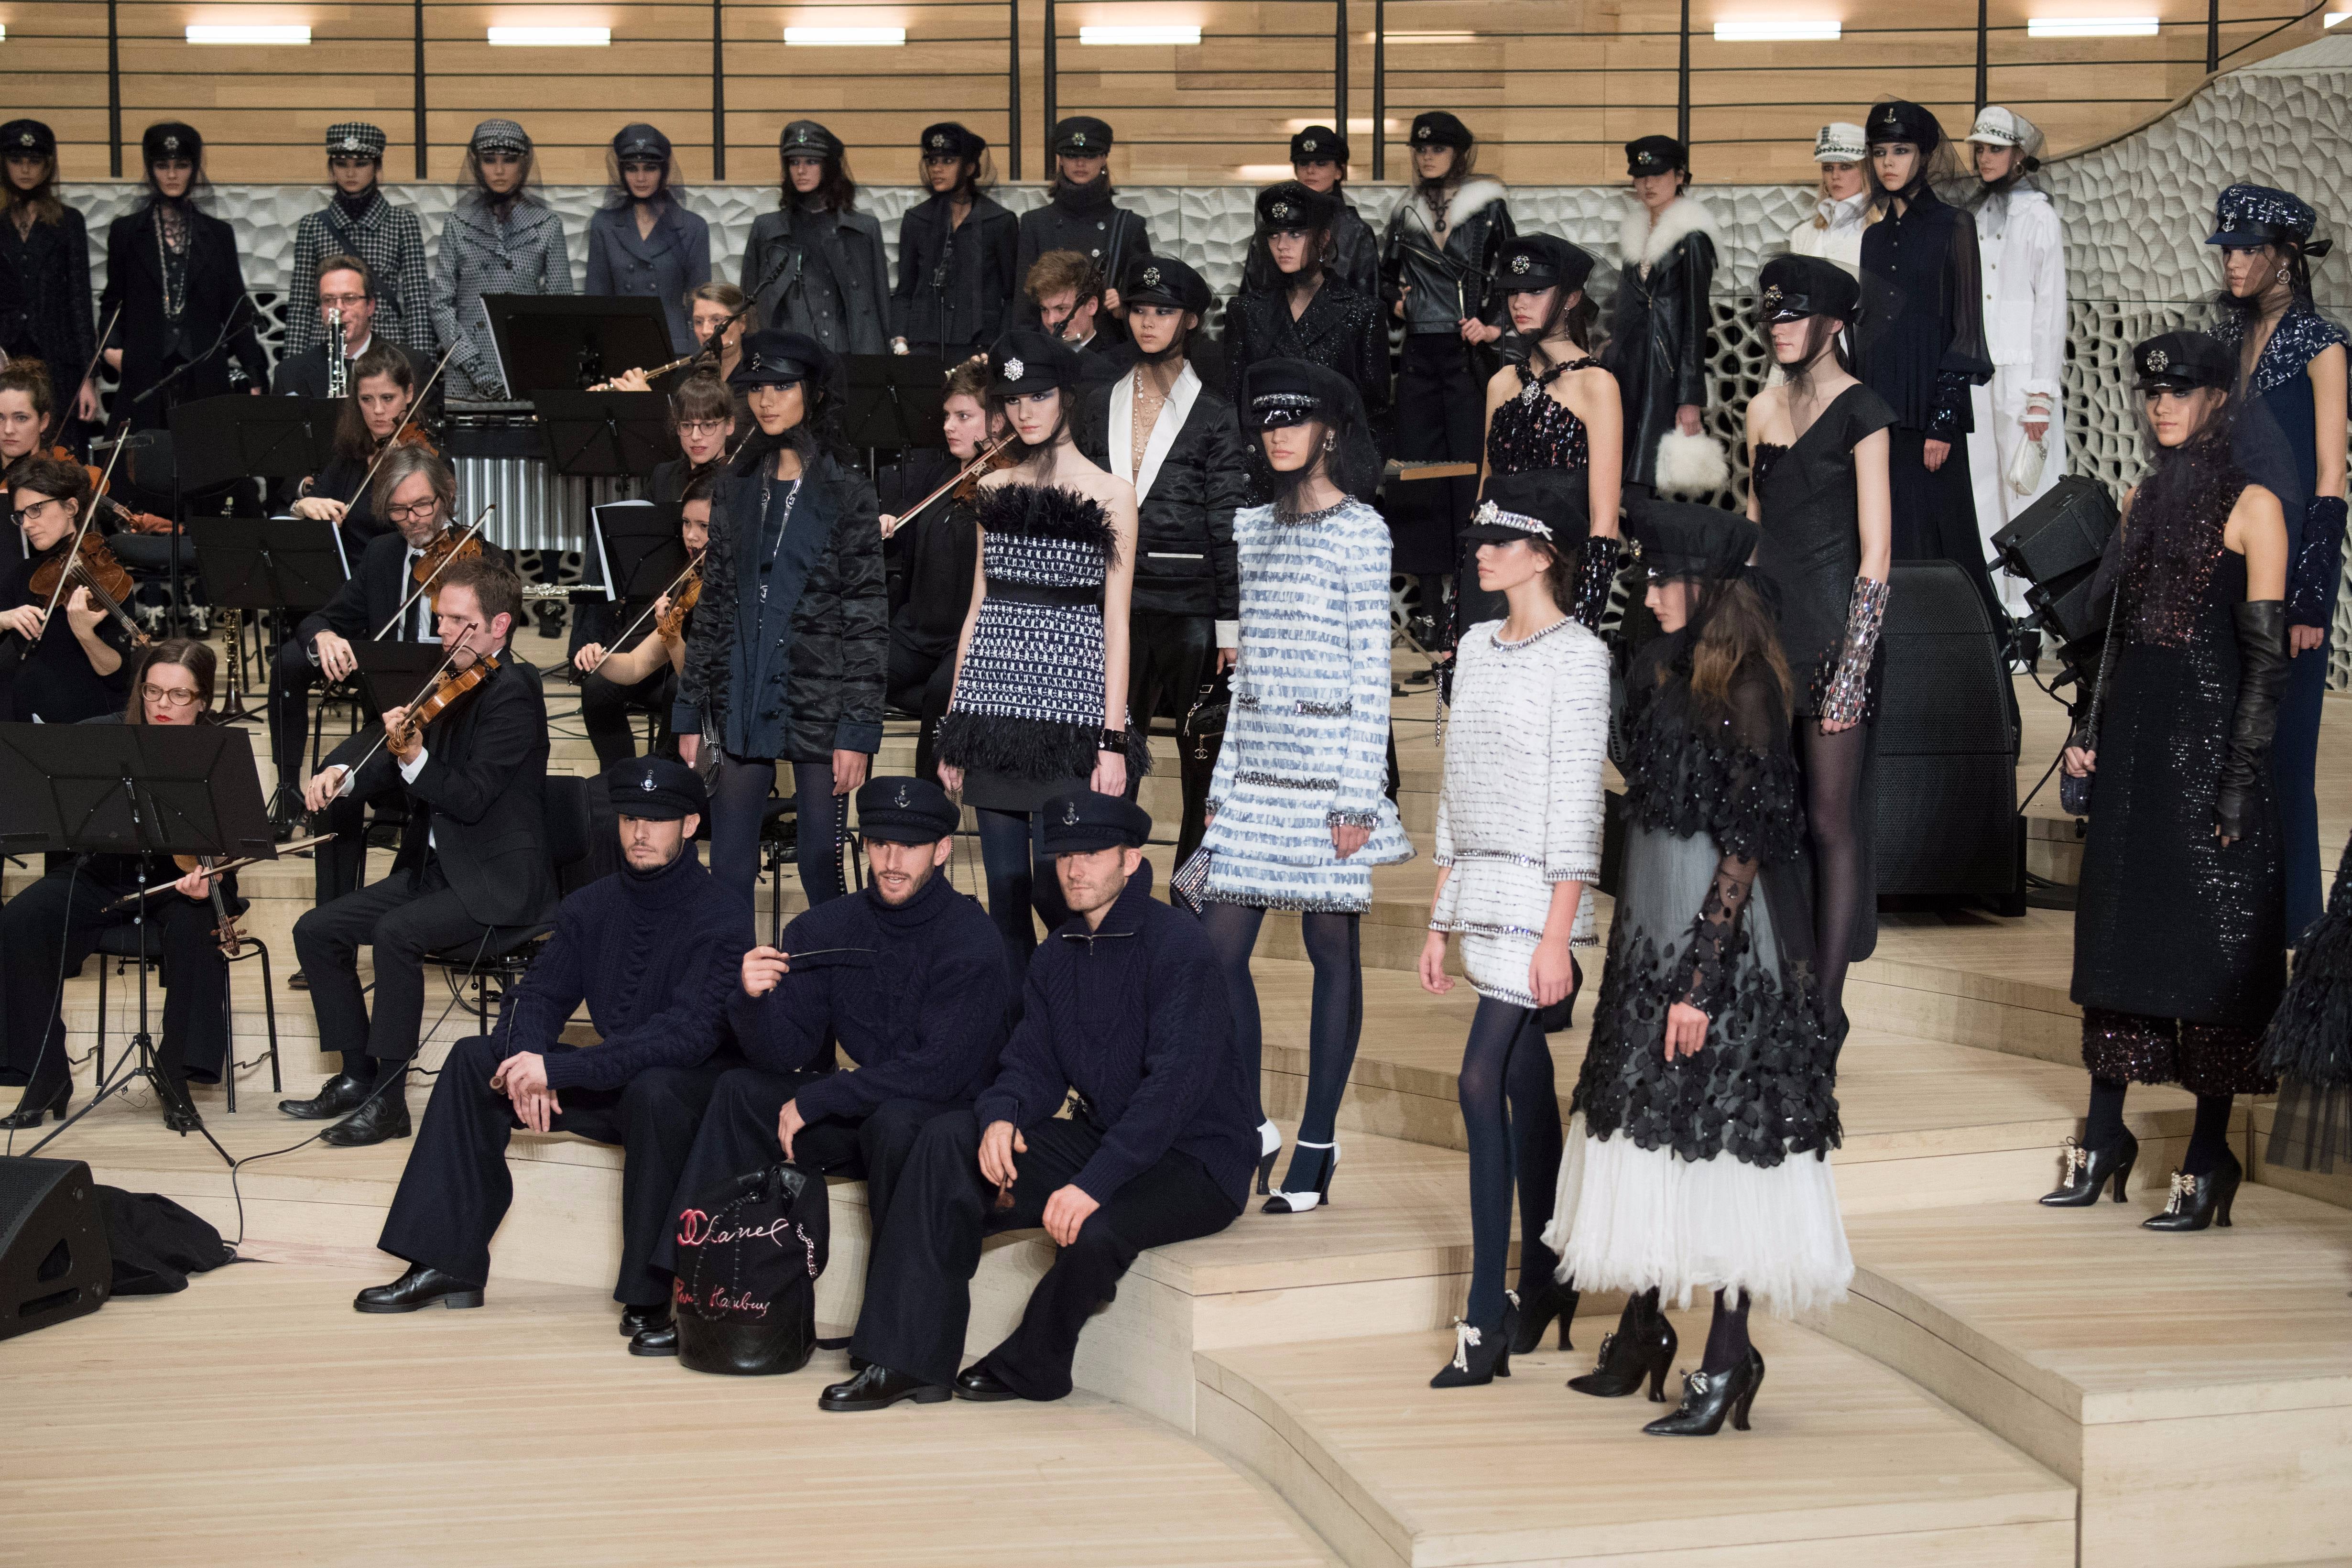 Vogue's best looks from the Chanel cruise 2023 show